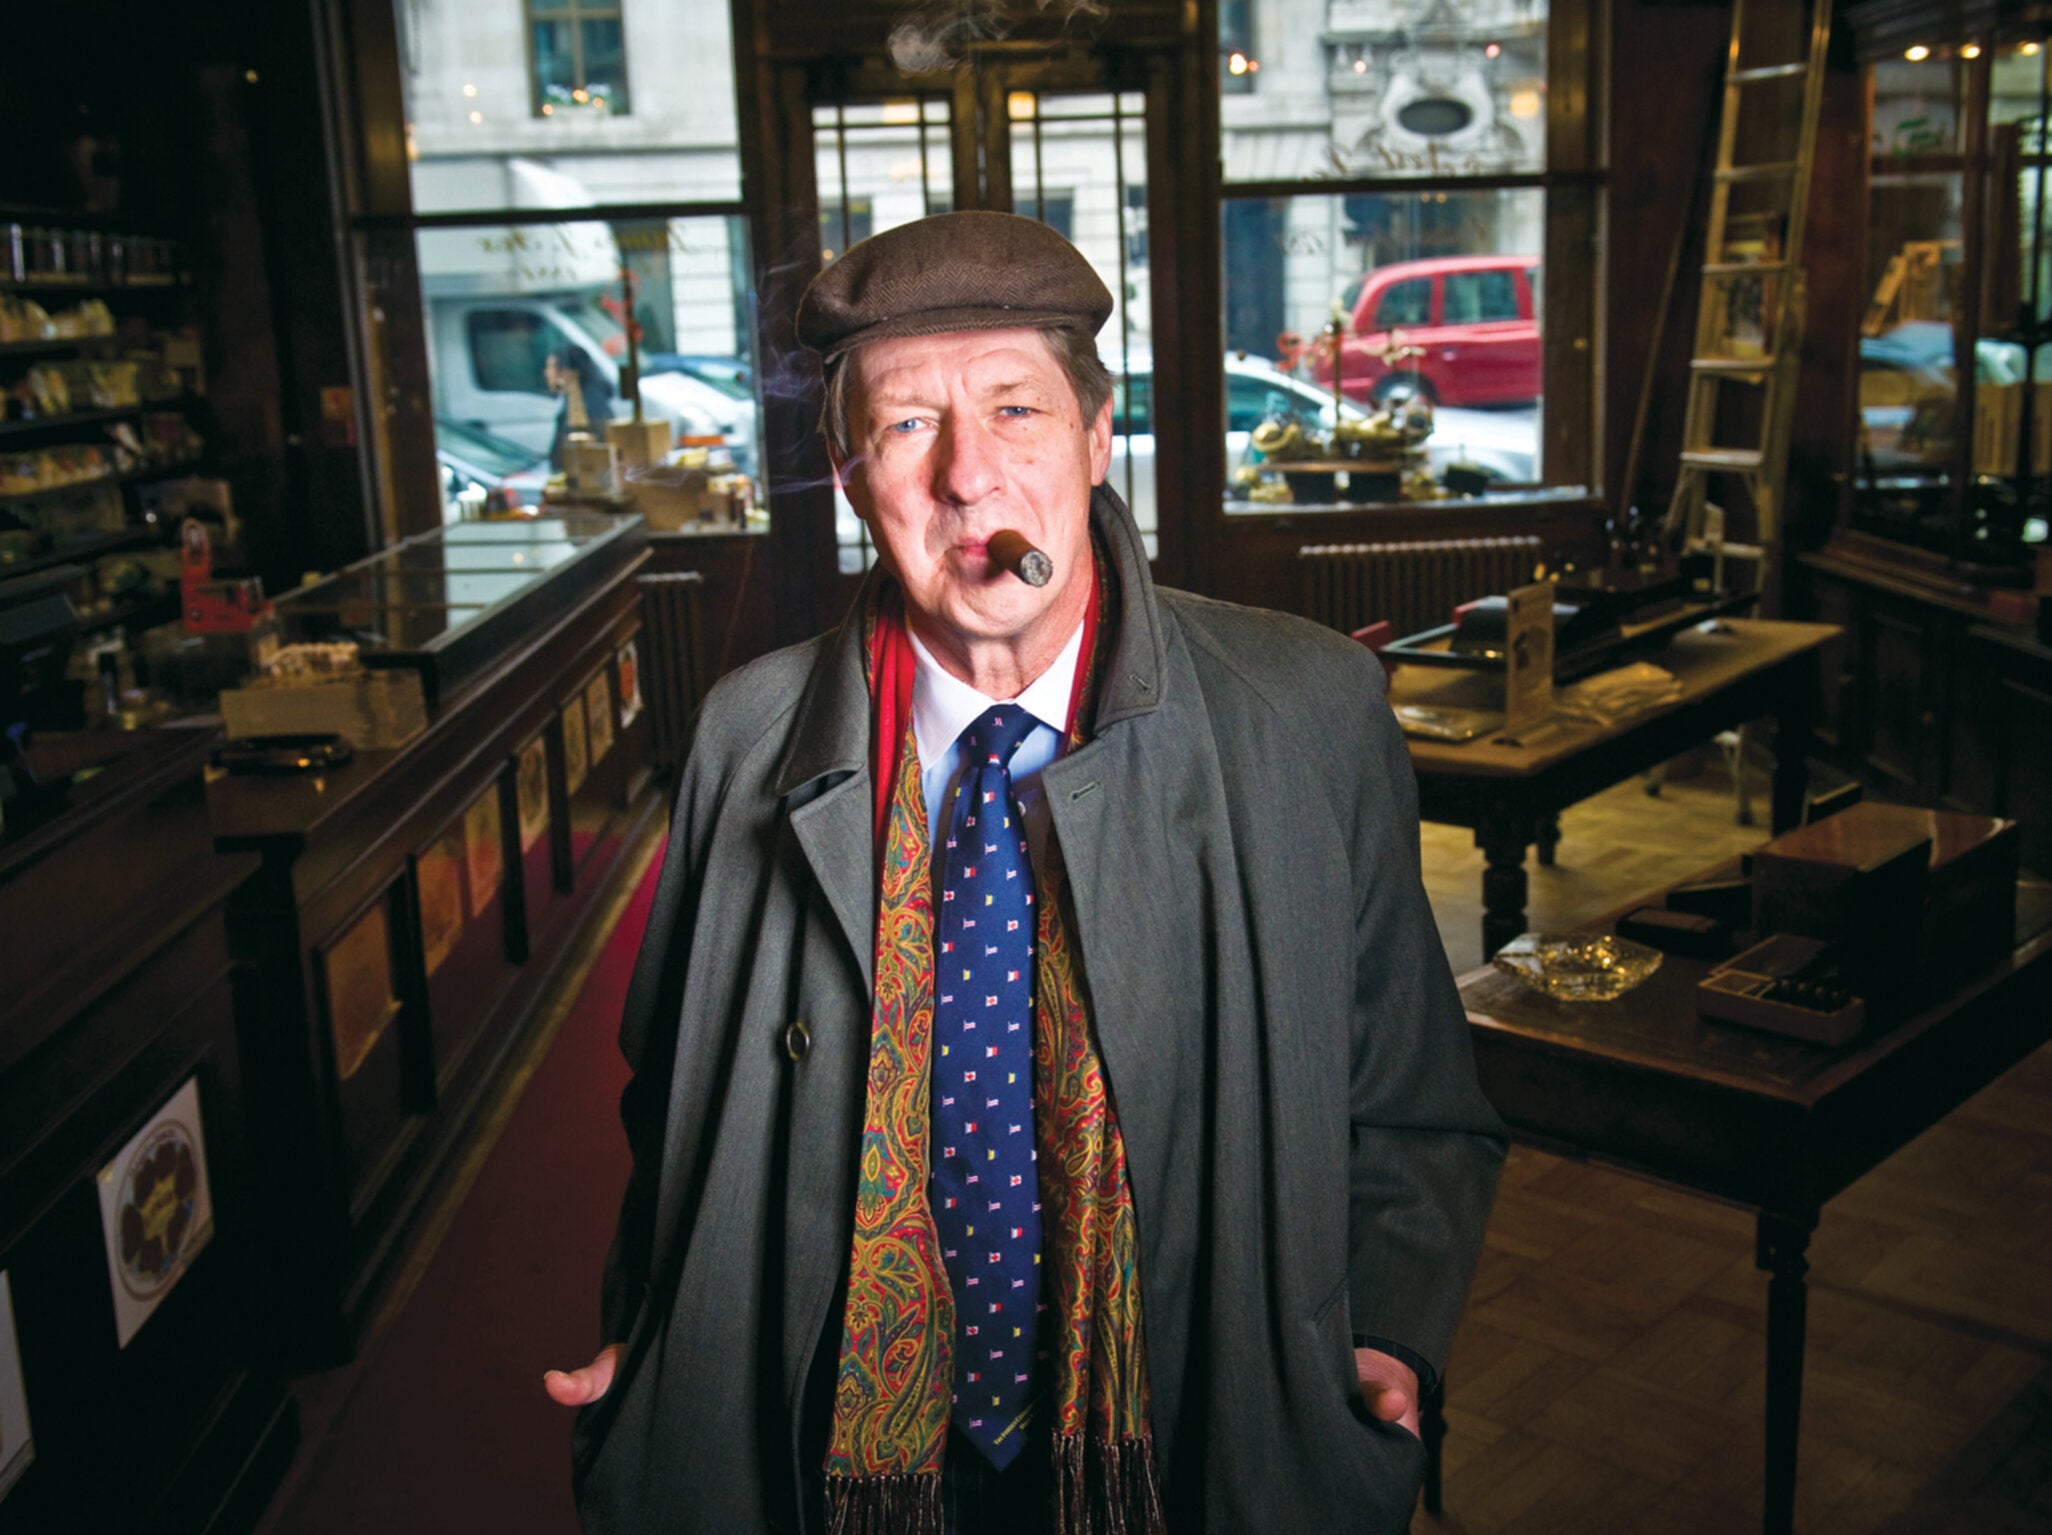 Remembering P.J. O'Rourke, one of the greatest writers of his generation